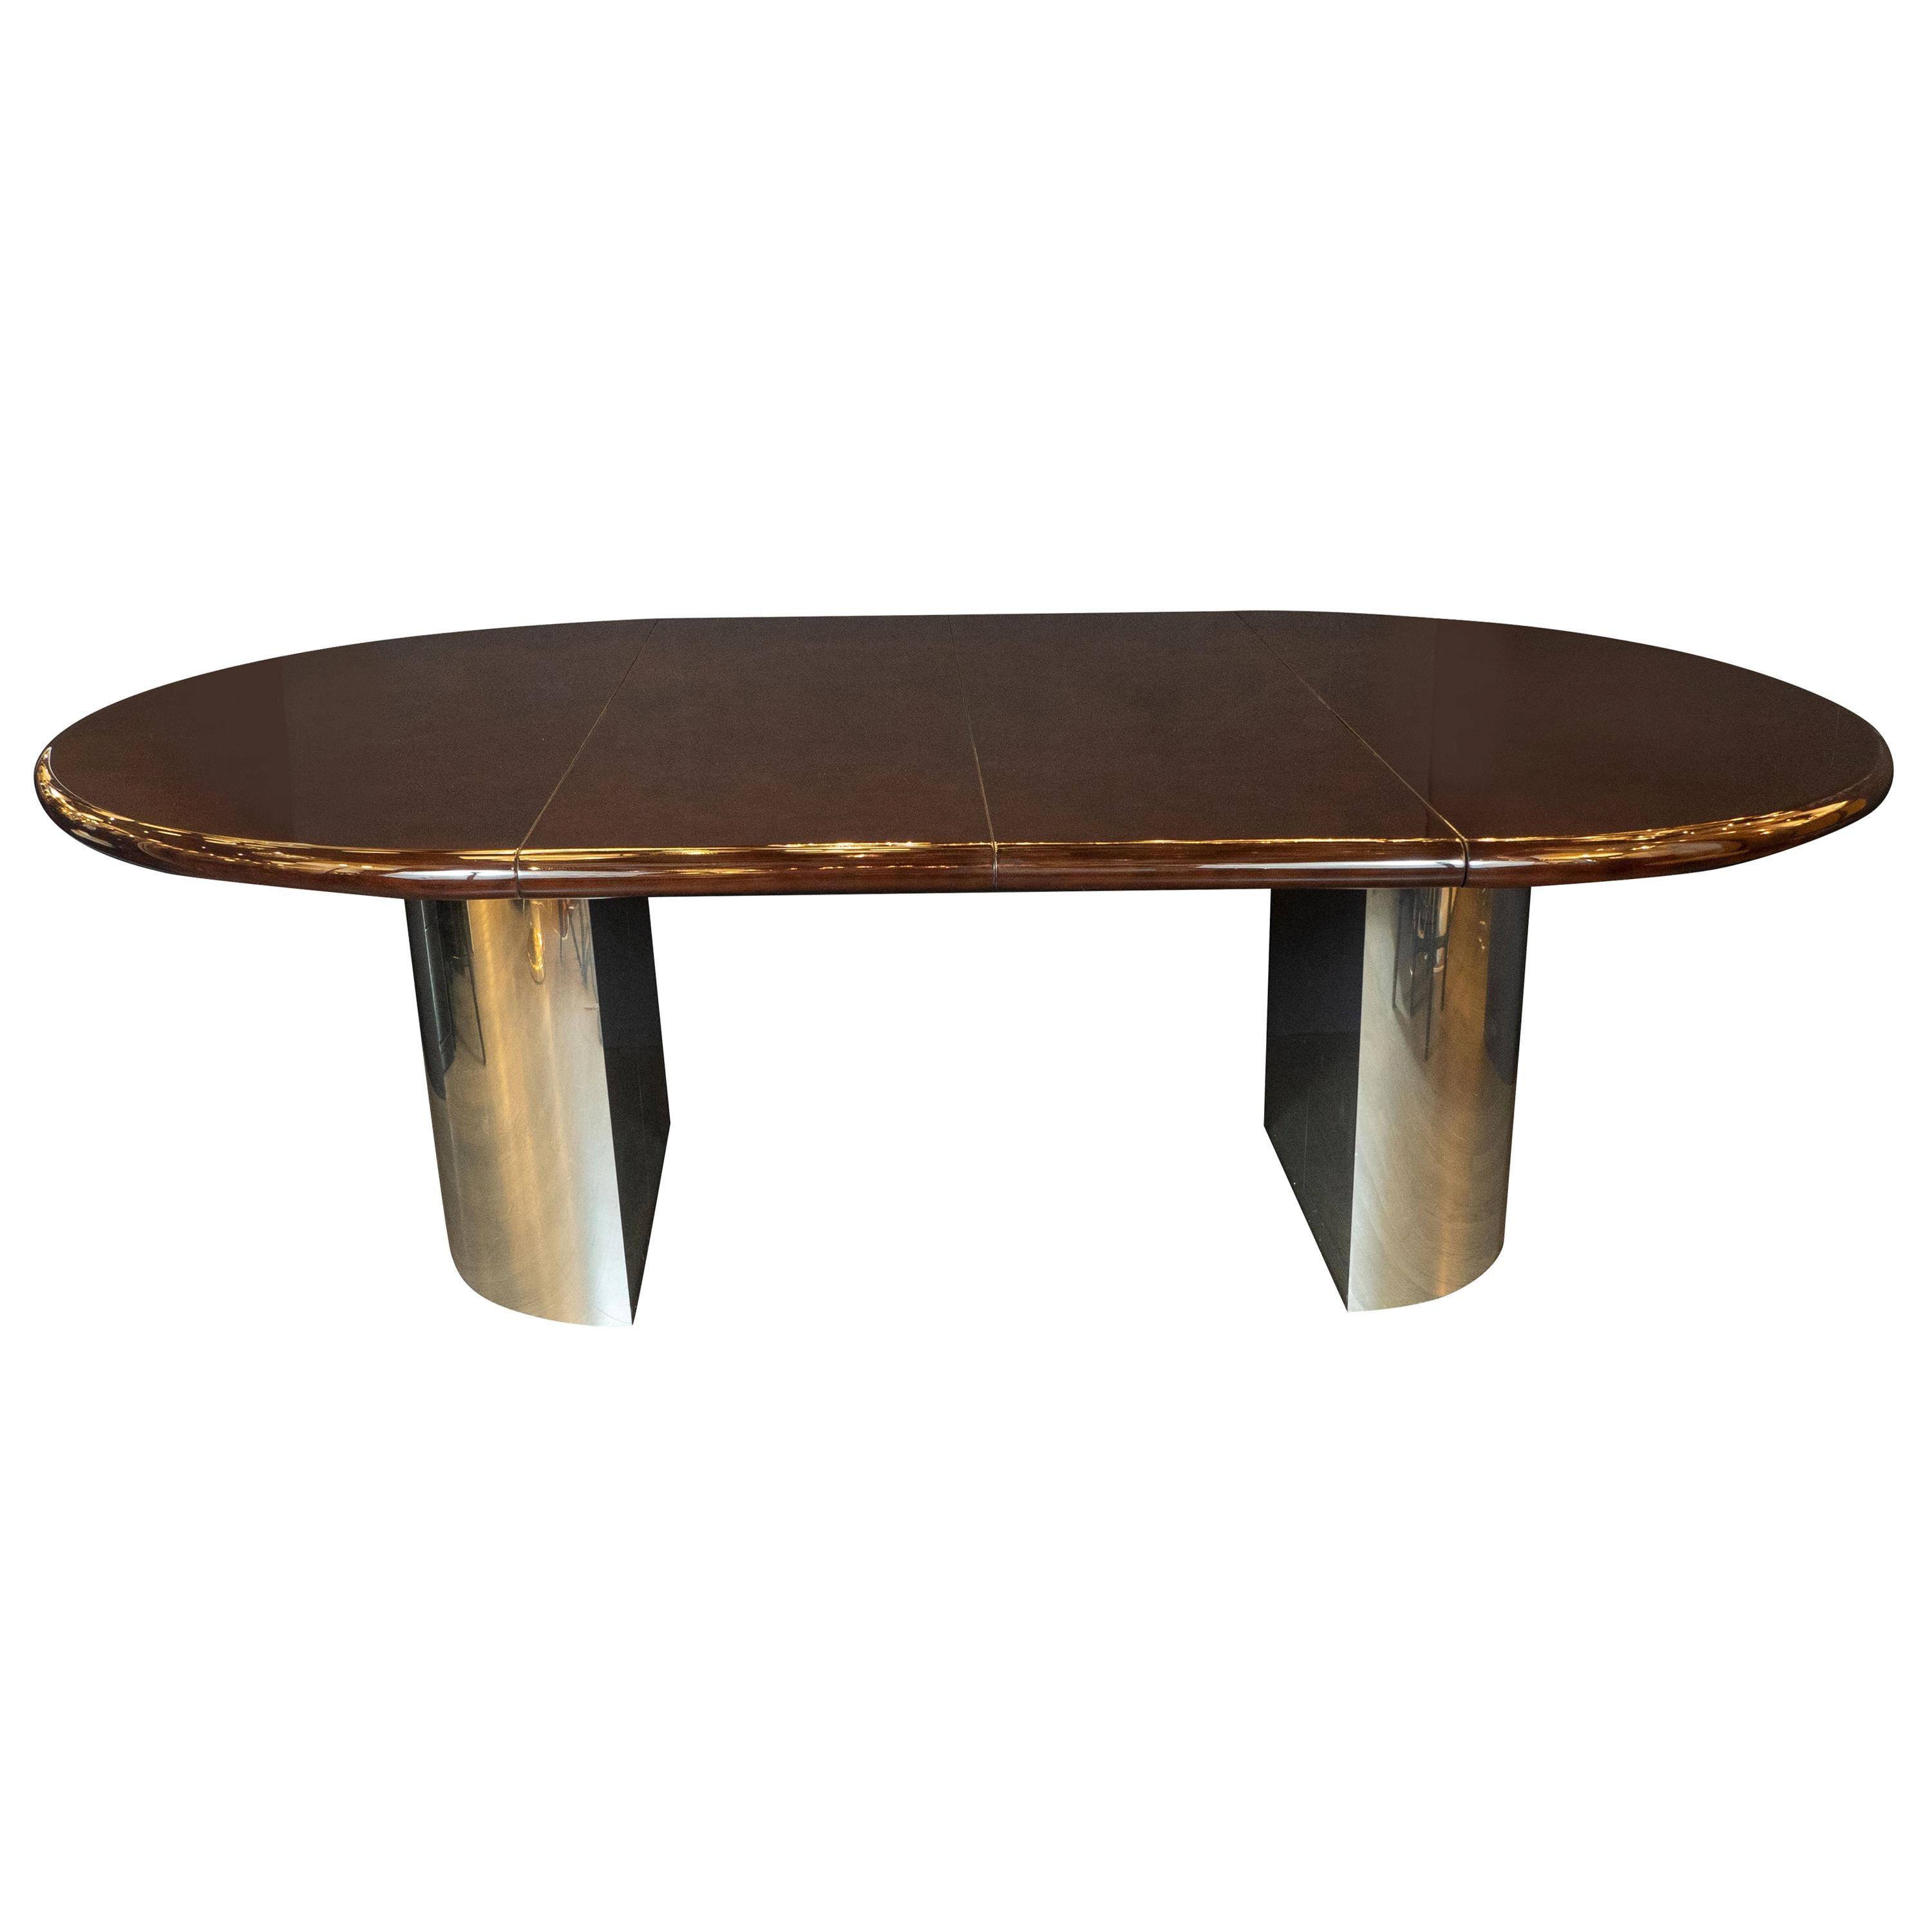 Mid-Century Modern Walnut Dining Table with Demilune Chrome Feet by Directional 